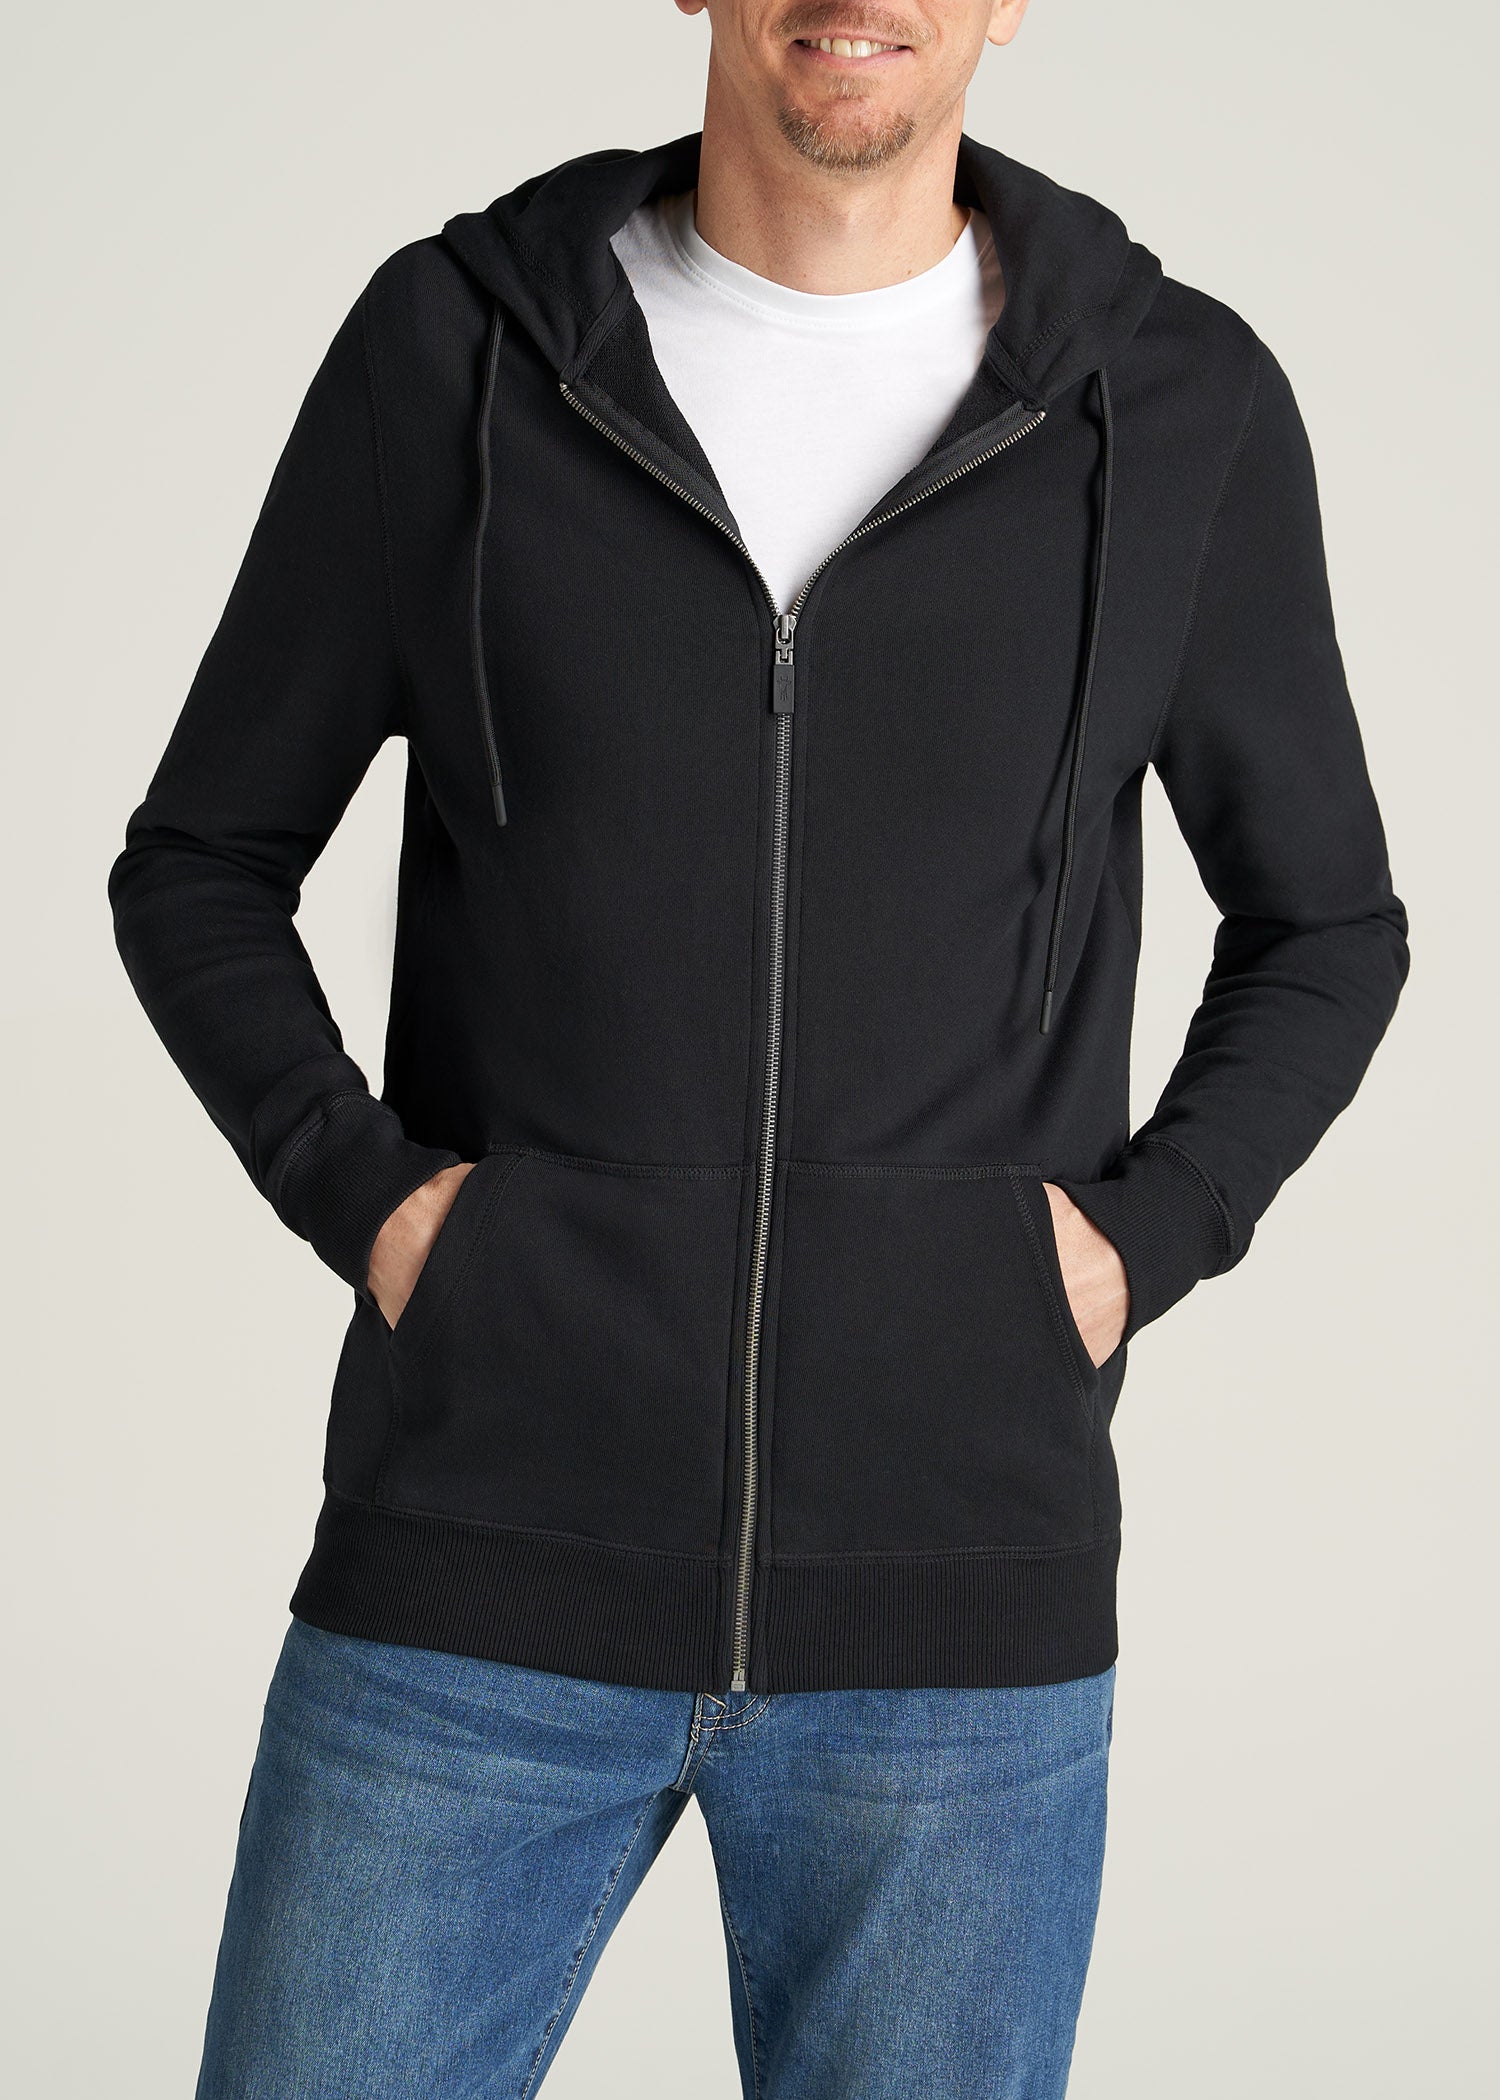 Men's Tall French Terry Zip Black Hoodie | American Tall